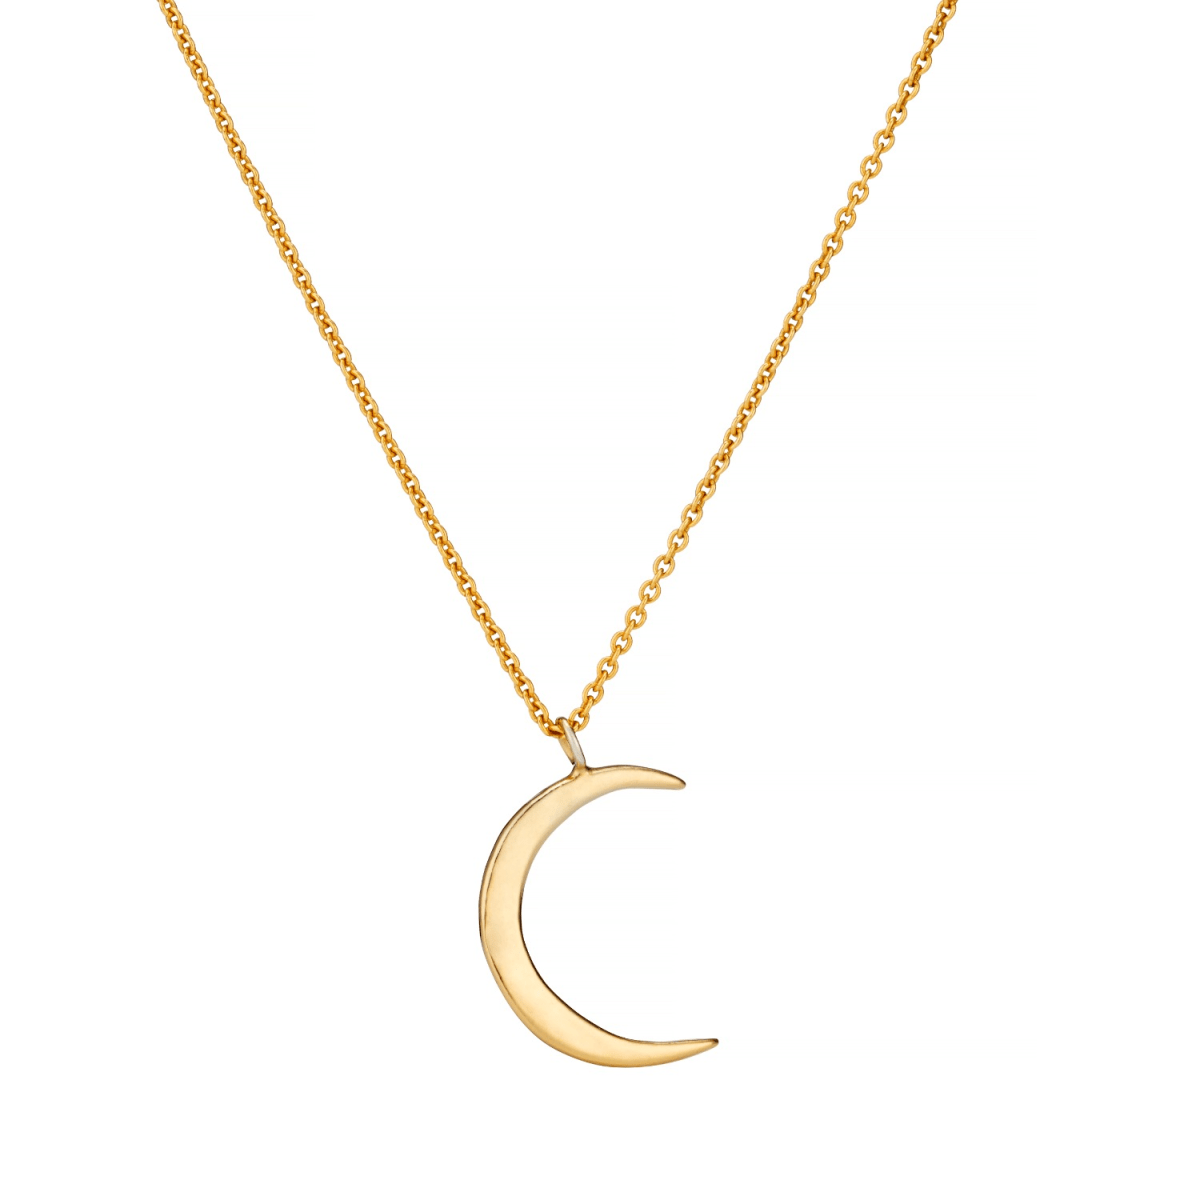 Posh Totty Designs Gold Plated Crescent Moon Necklace